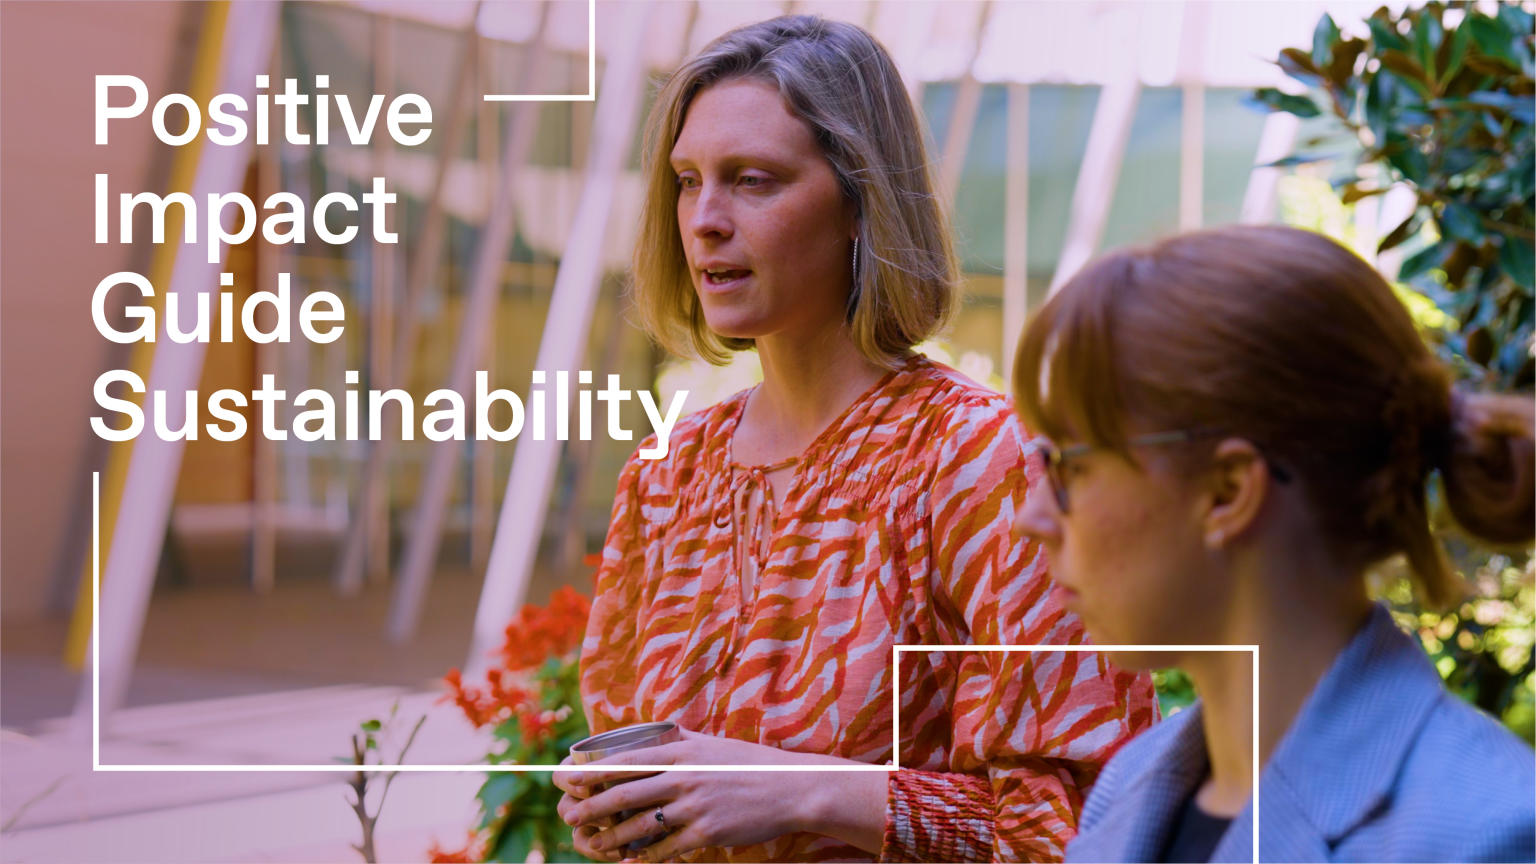 Sustainability Manager Sam Ferrier discusses enhancing event sustainability with the Positive Impact Guide.